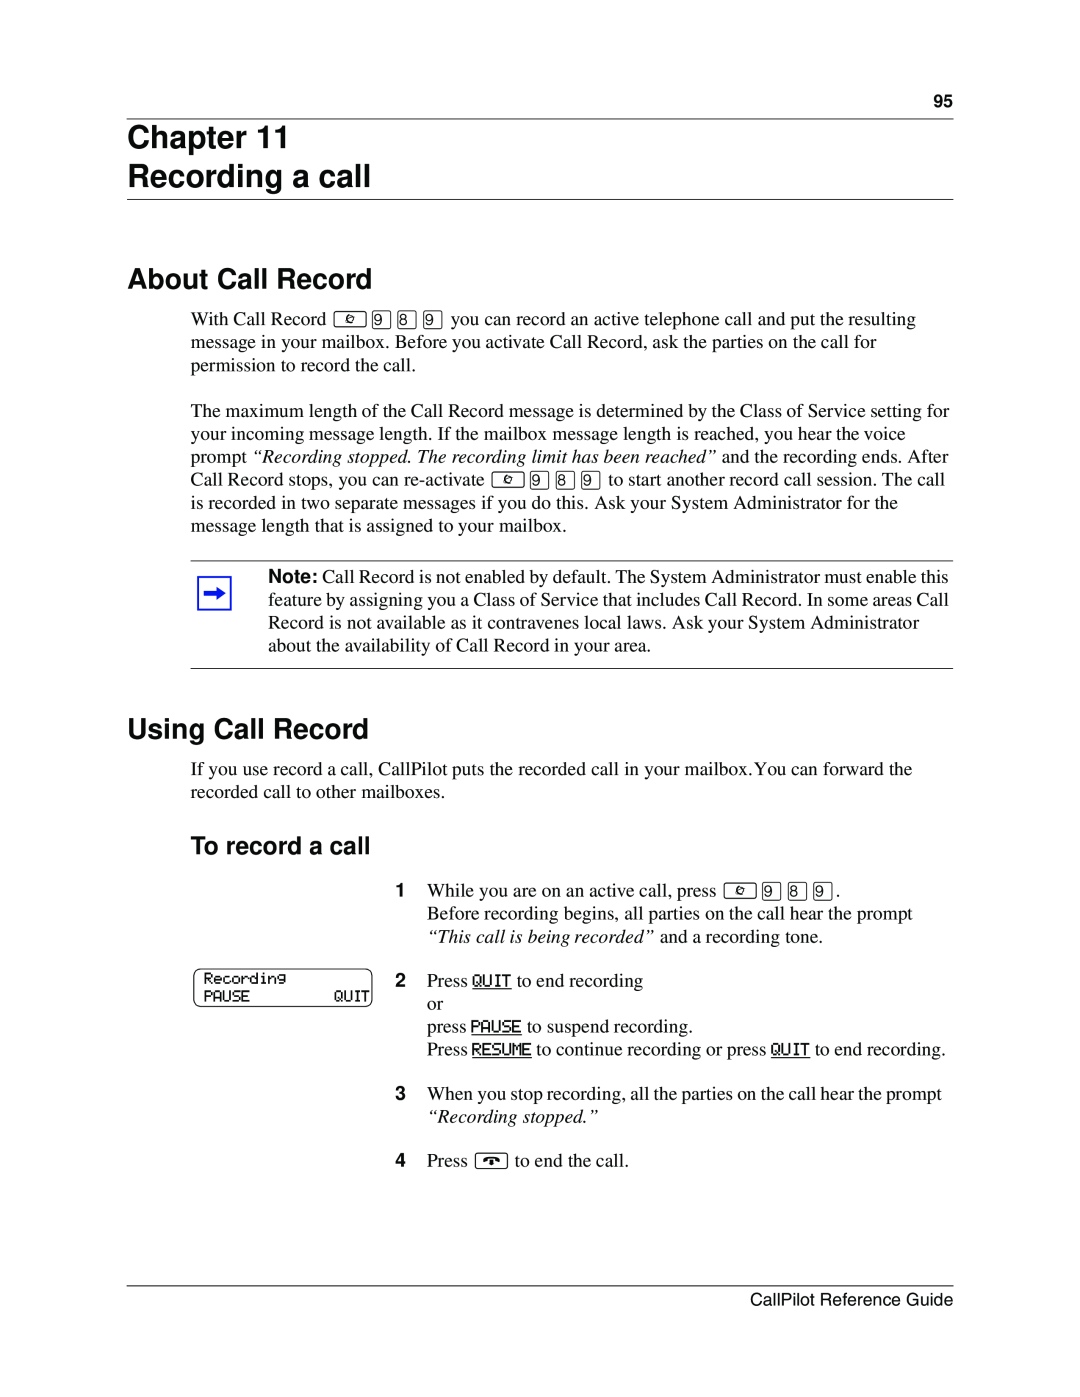 Nortel Networks CallPilot manual Chapter Recording a call, About Call Record, Using Call Record, To record a call 